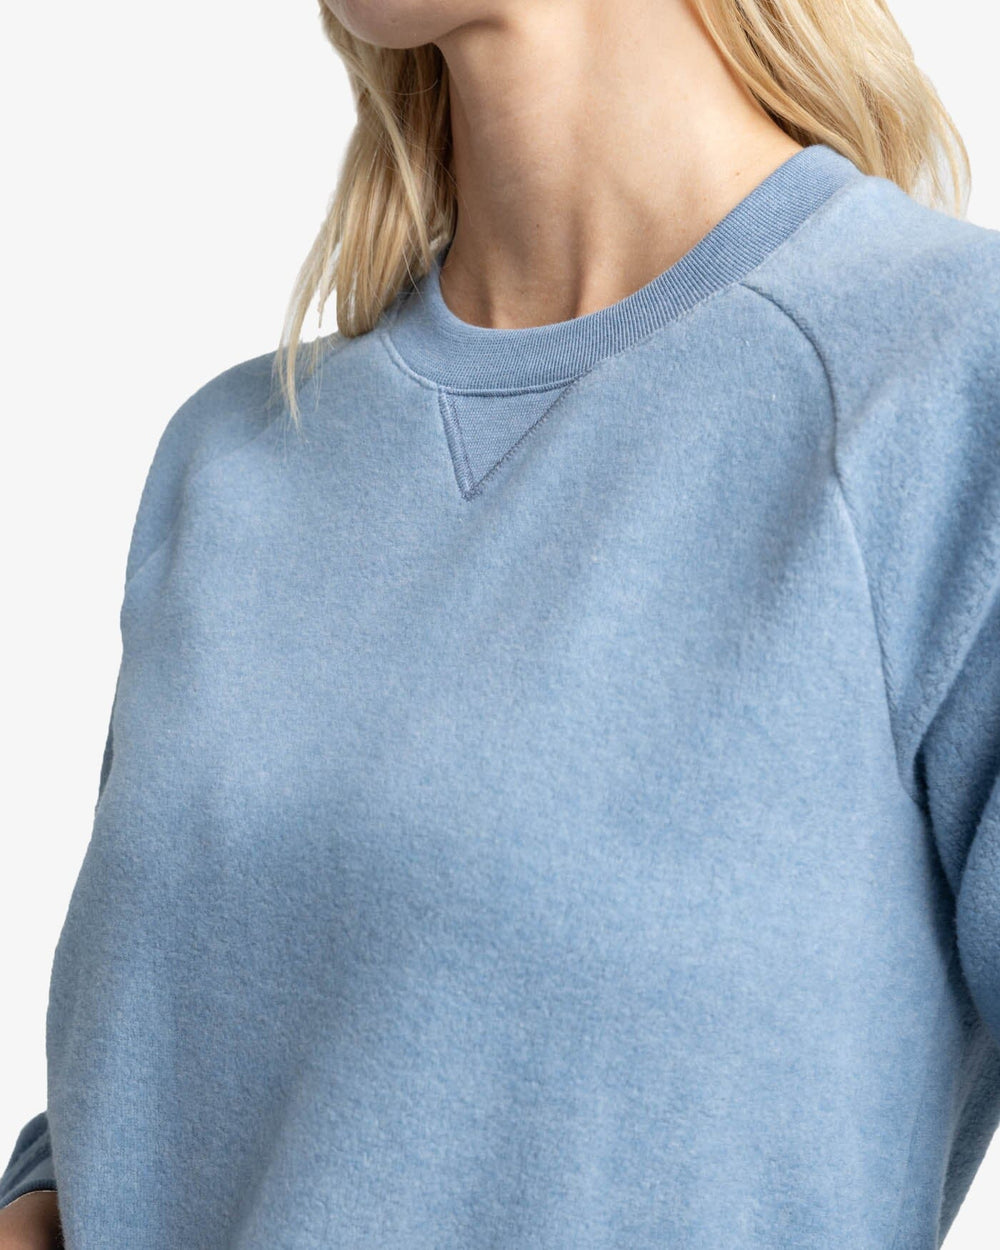 The detail view of the Southern Tide Seaside Retreat Heather Sweatshirt by Southern Tide - Heather Mountain Spring Blue